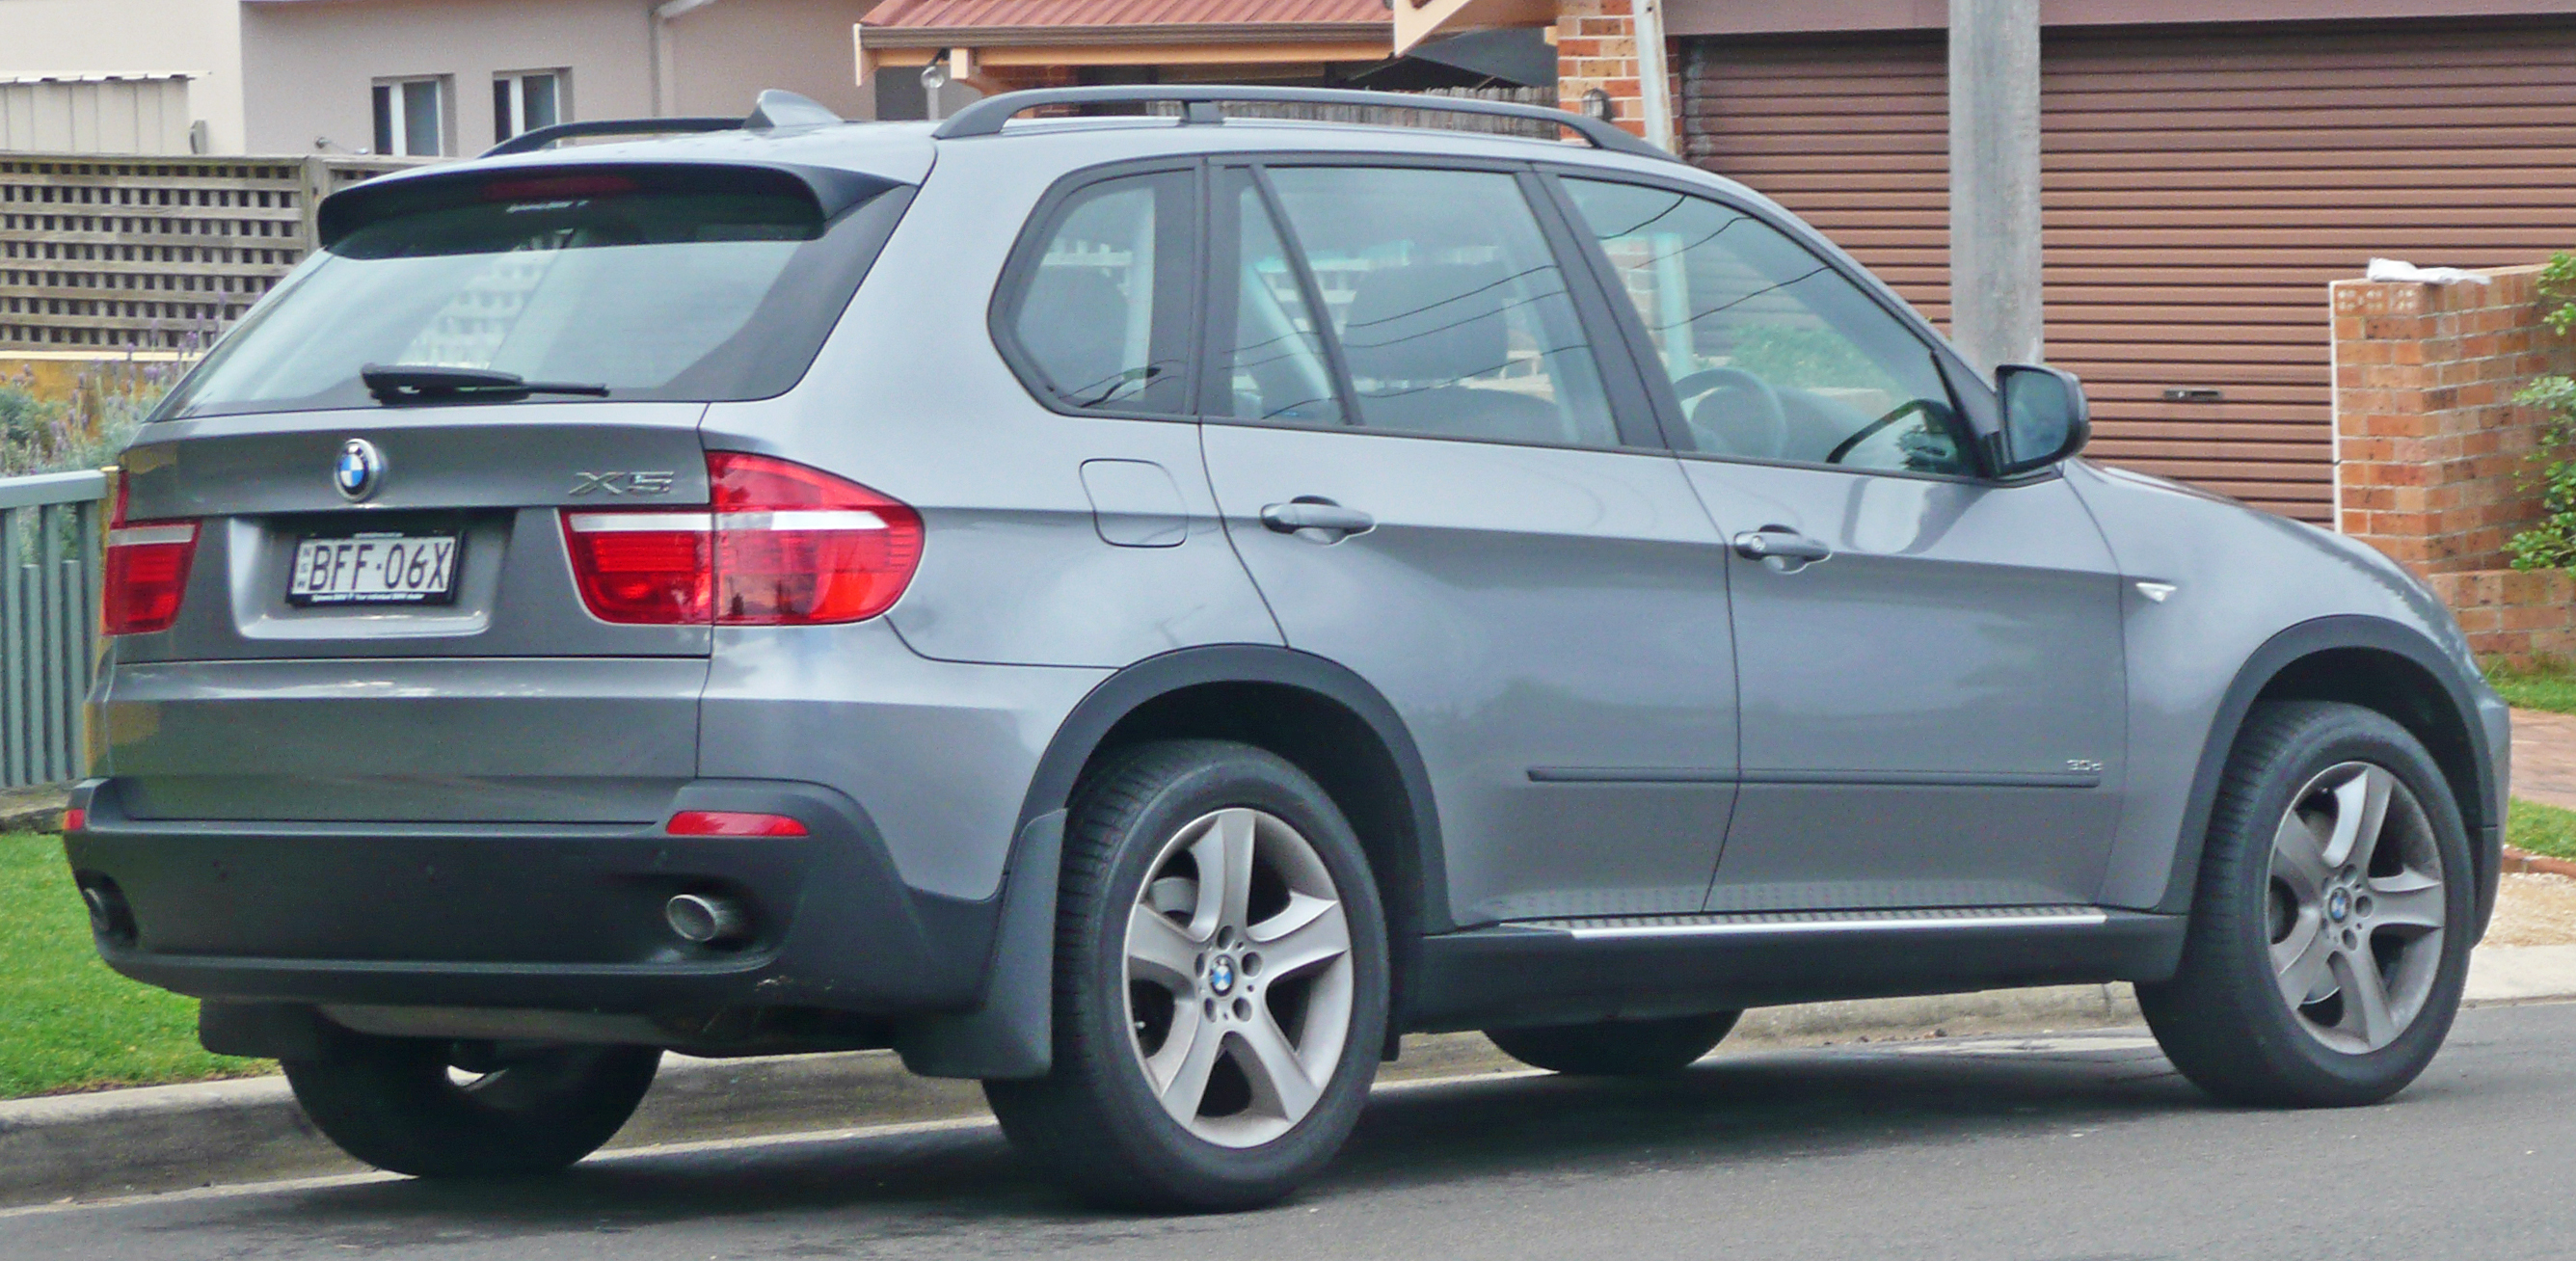 BMW X5 Series 2nd (E70) Generation Exterior Side View